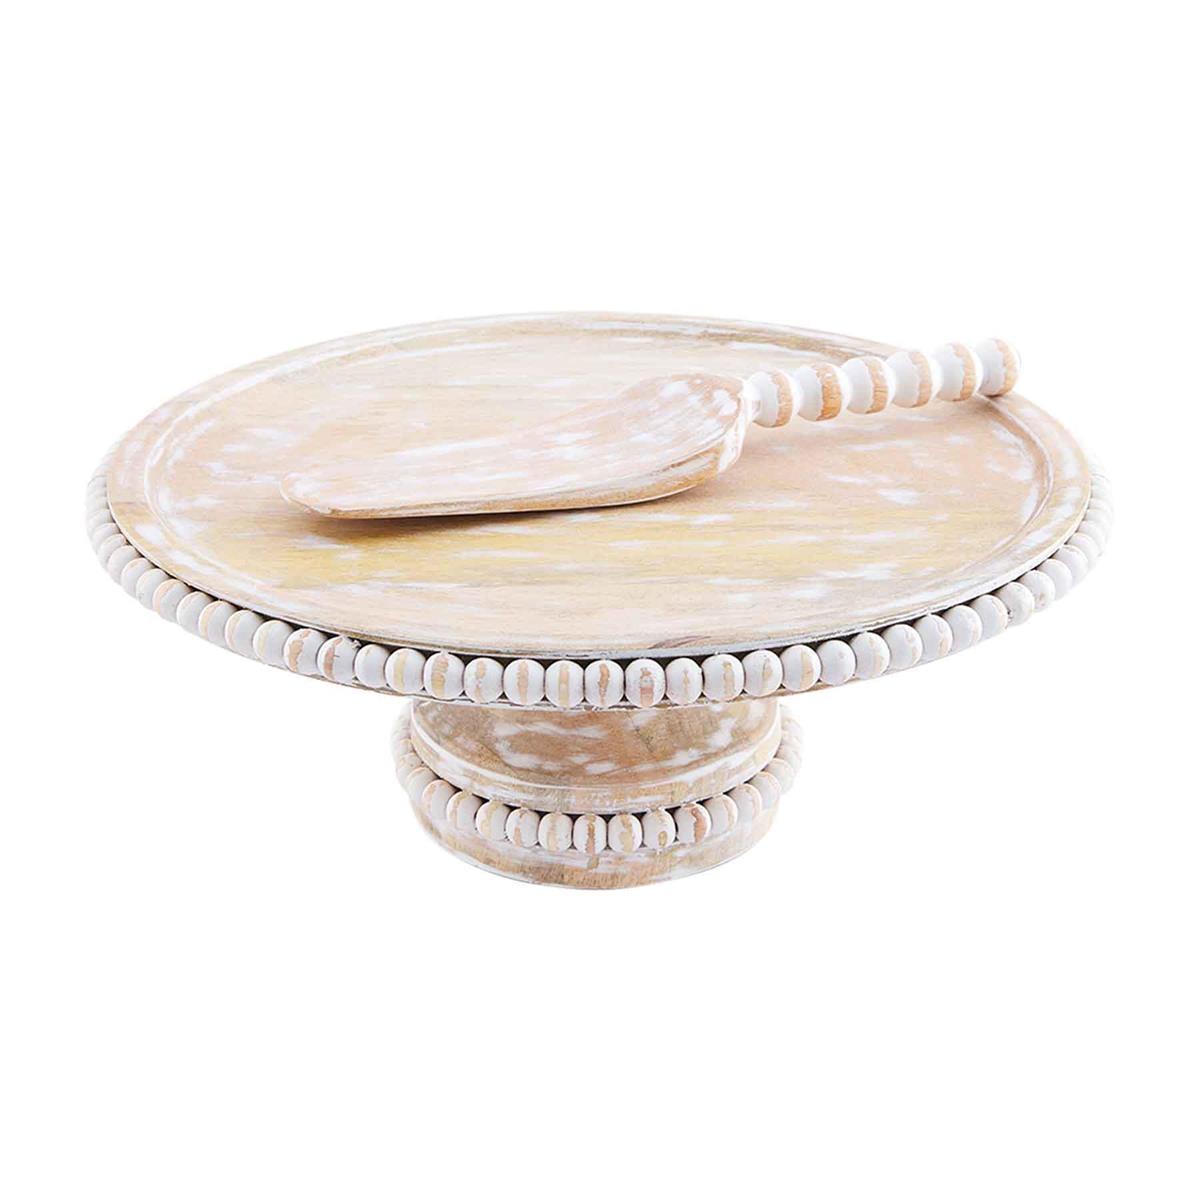 wooden beaded cake stand displayed with a wooden beaded cake server on a white background